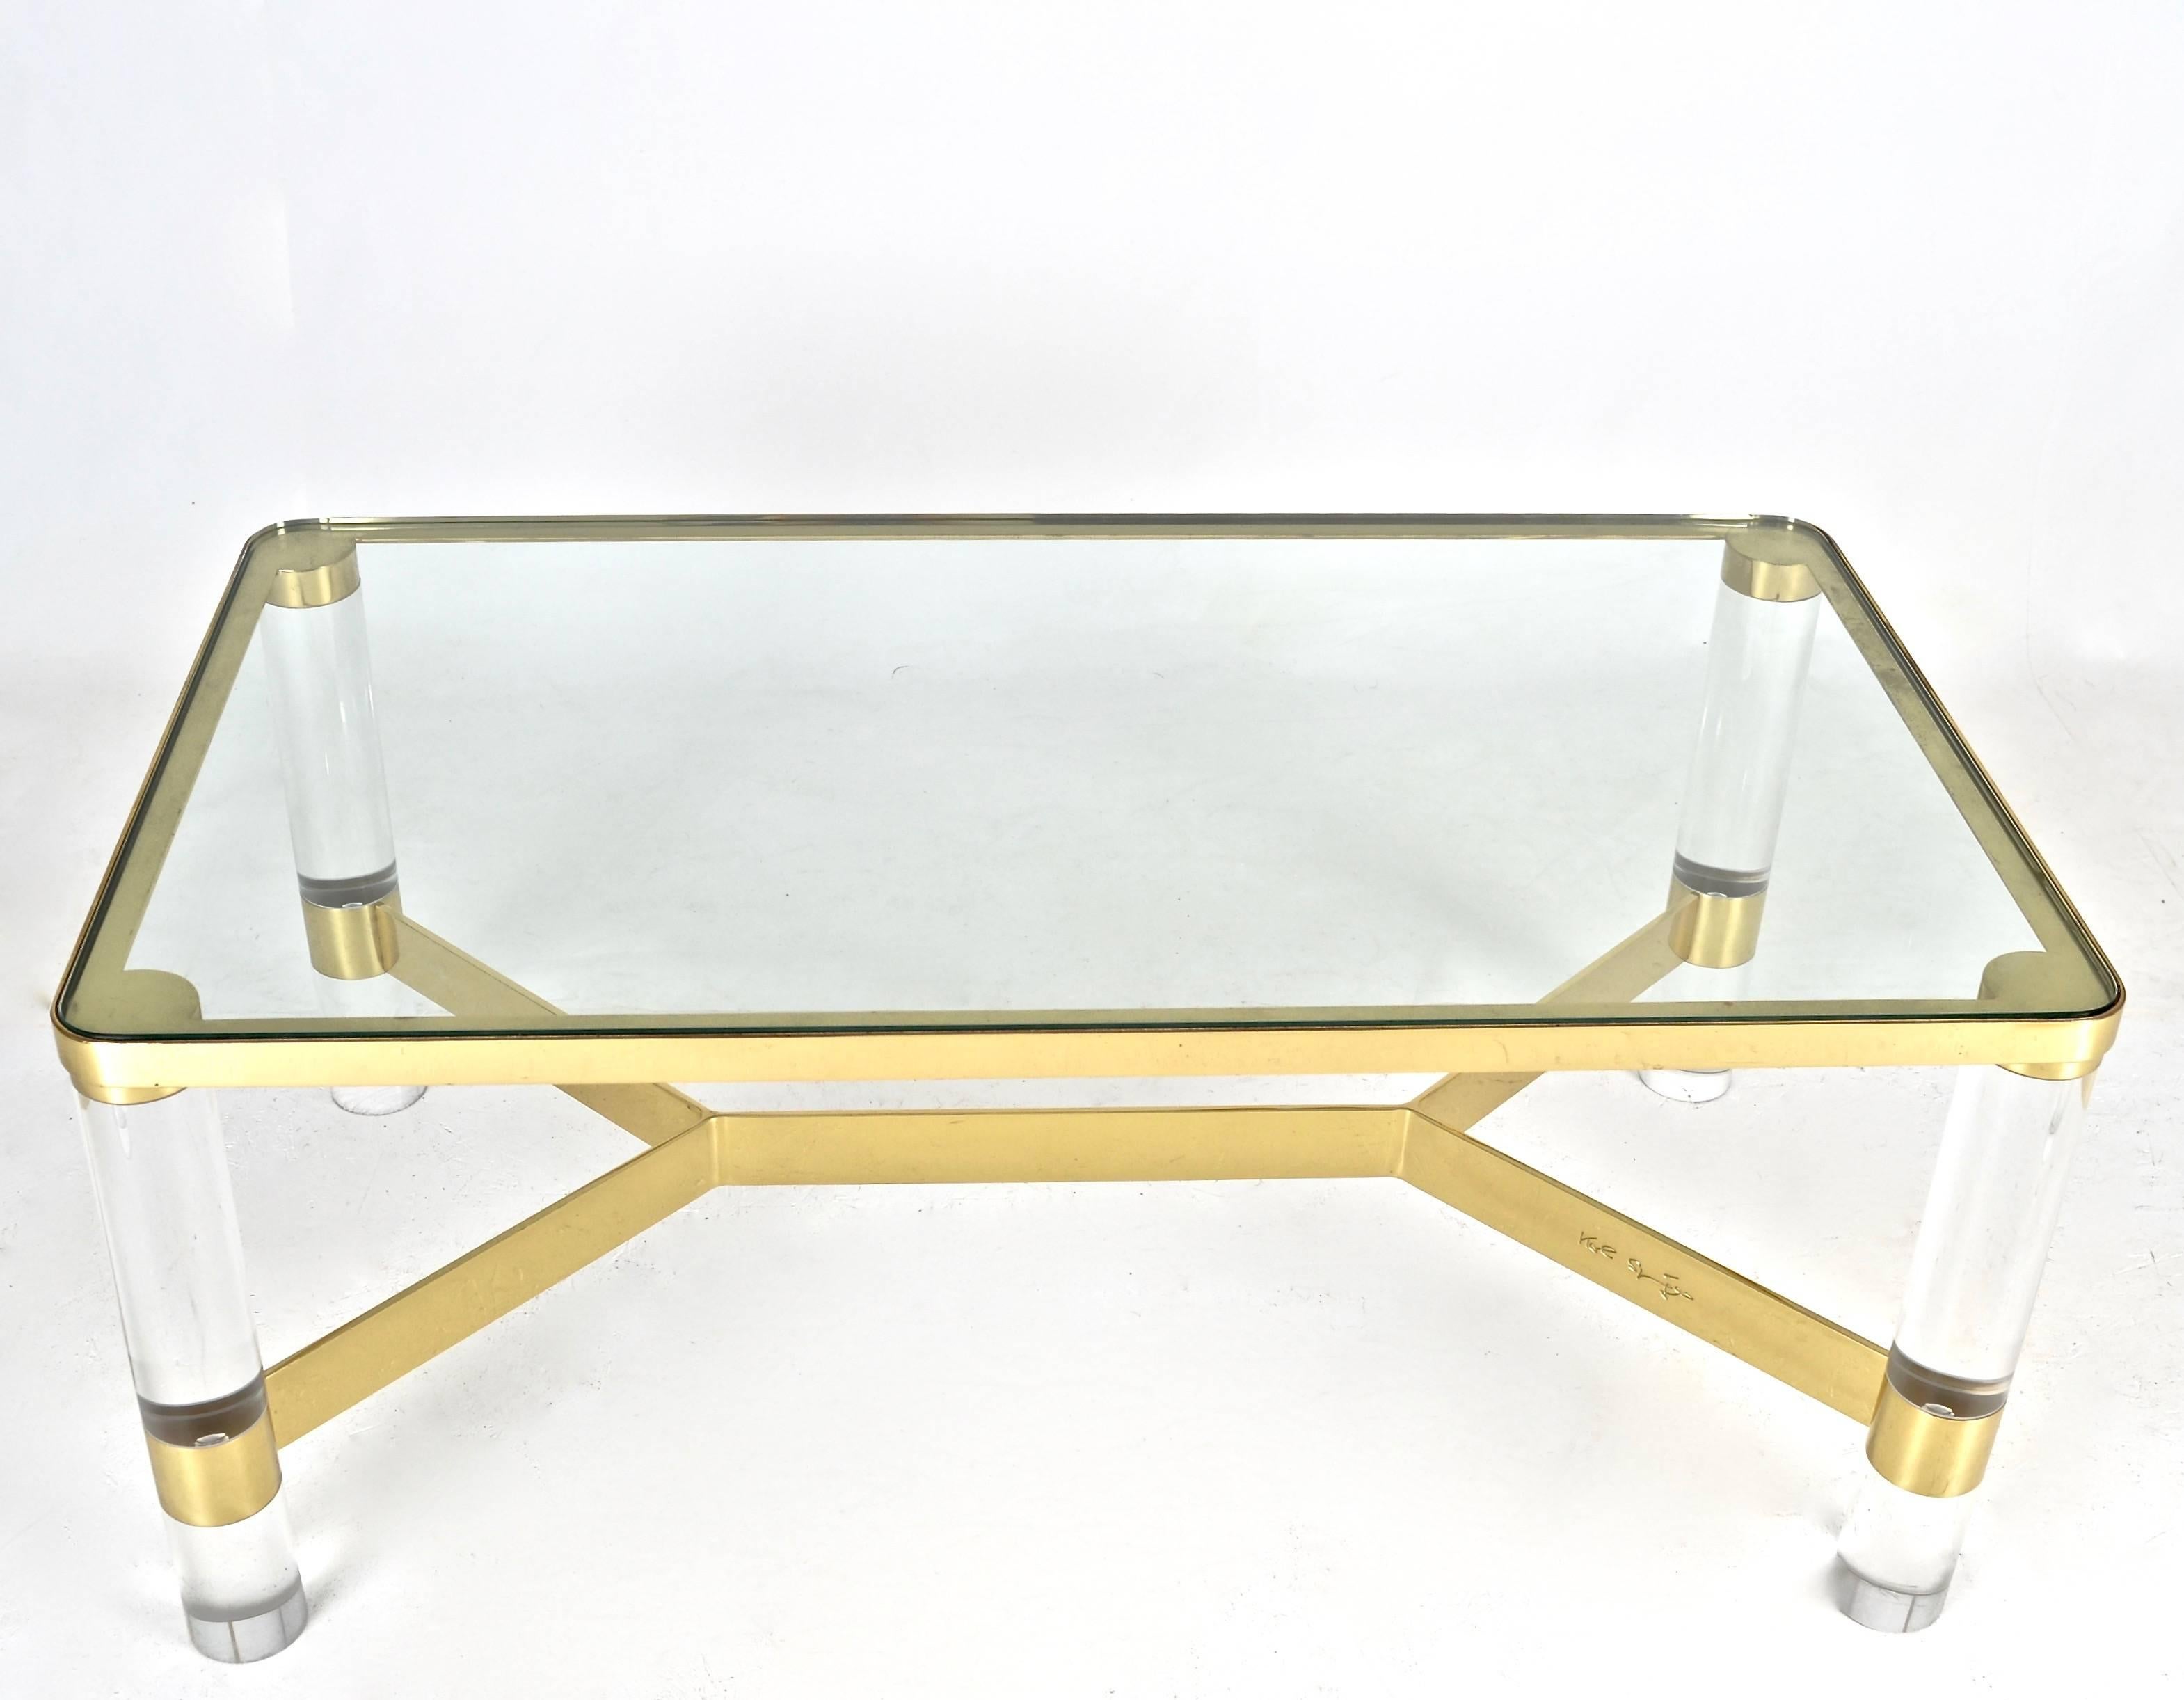 In excellent condition, newly polished and lacquered. Featuring distinctive design and incised Karl Springer signature. Heavy glass top set into polished brass frame. Thick cylindrical Lucite legs. 